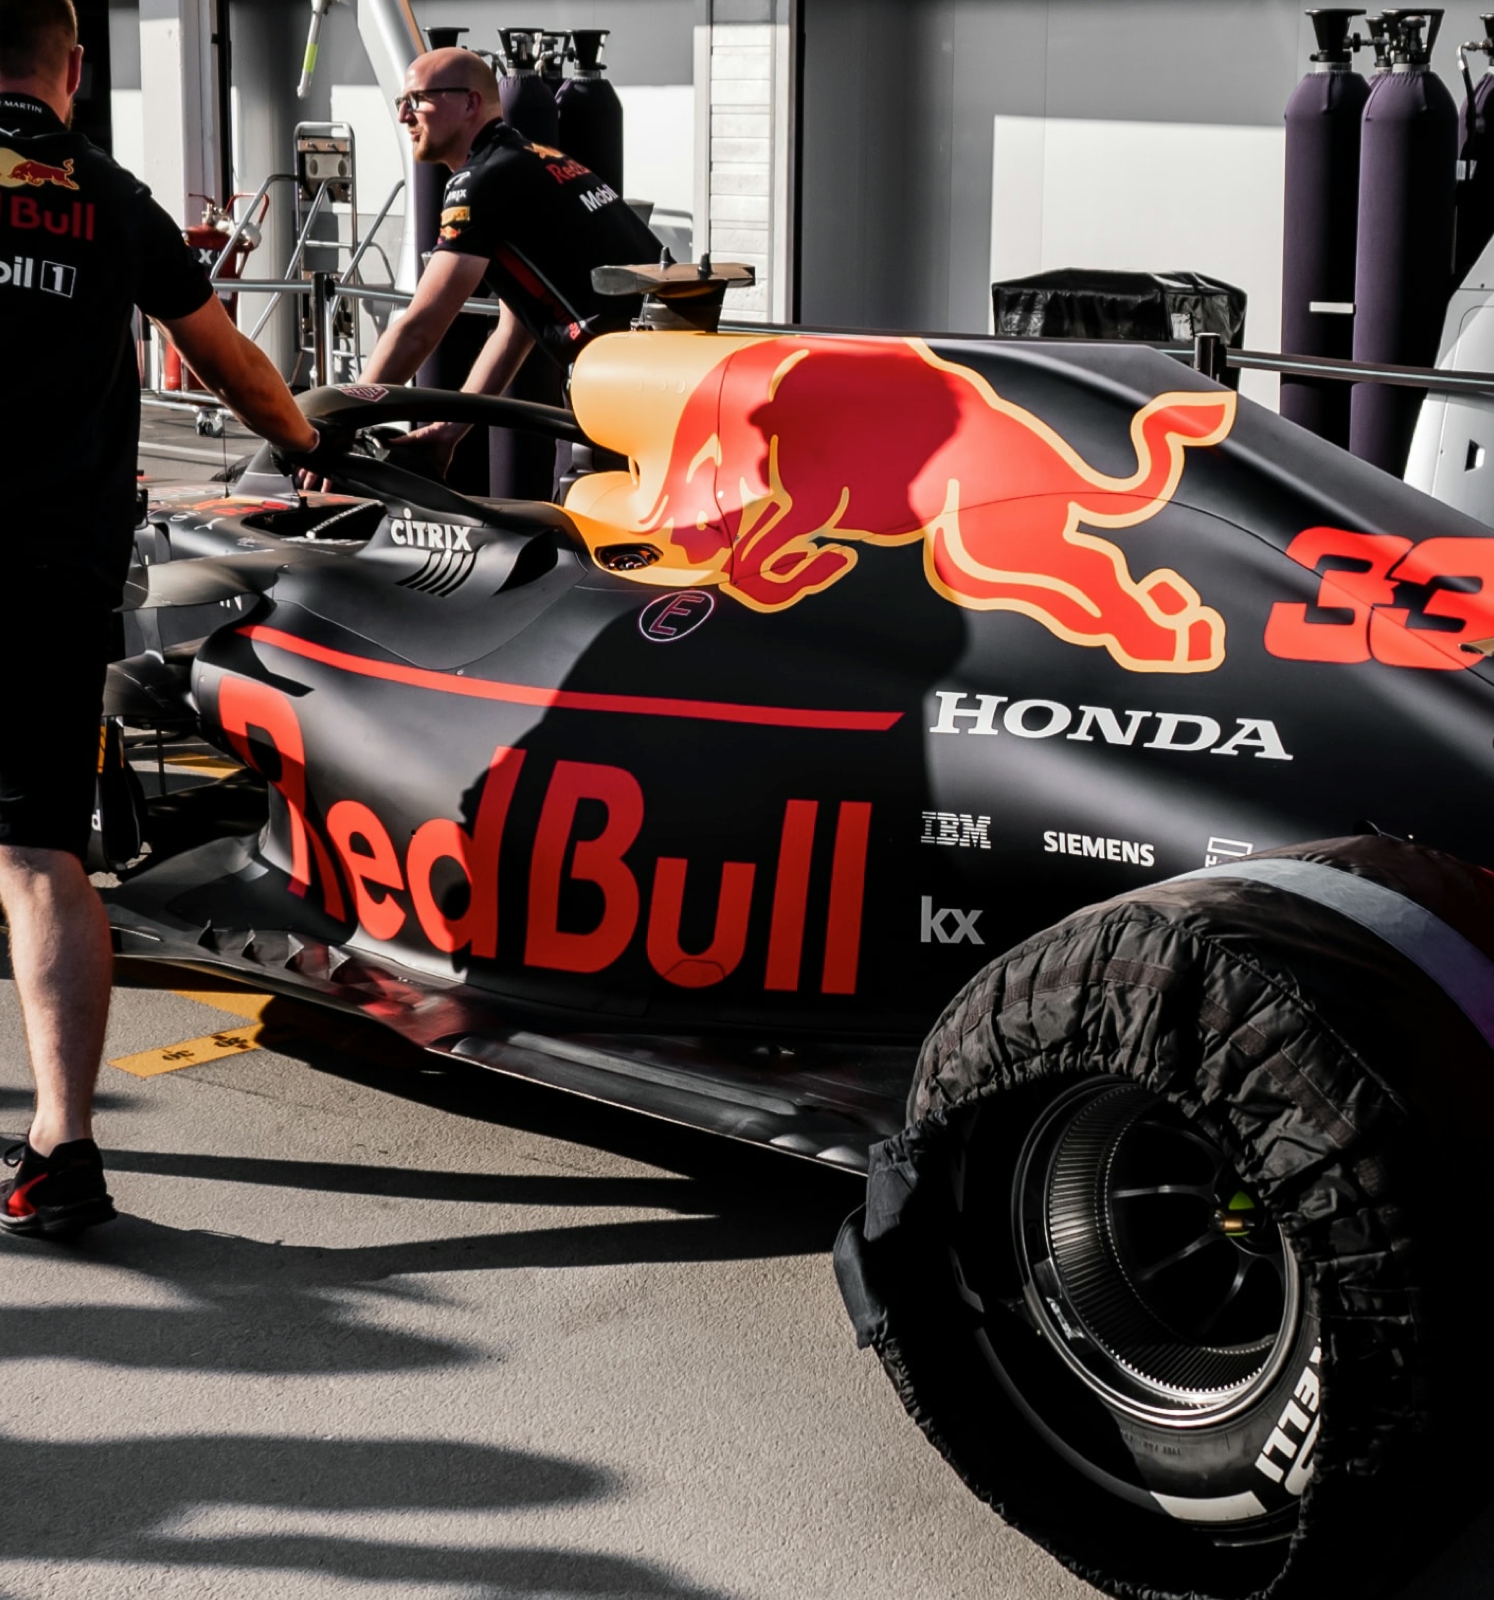 A Red Bull racing car and a member of the Red Bull team